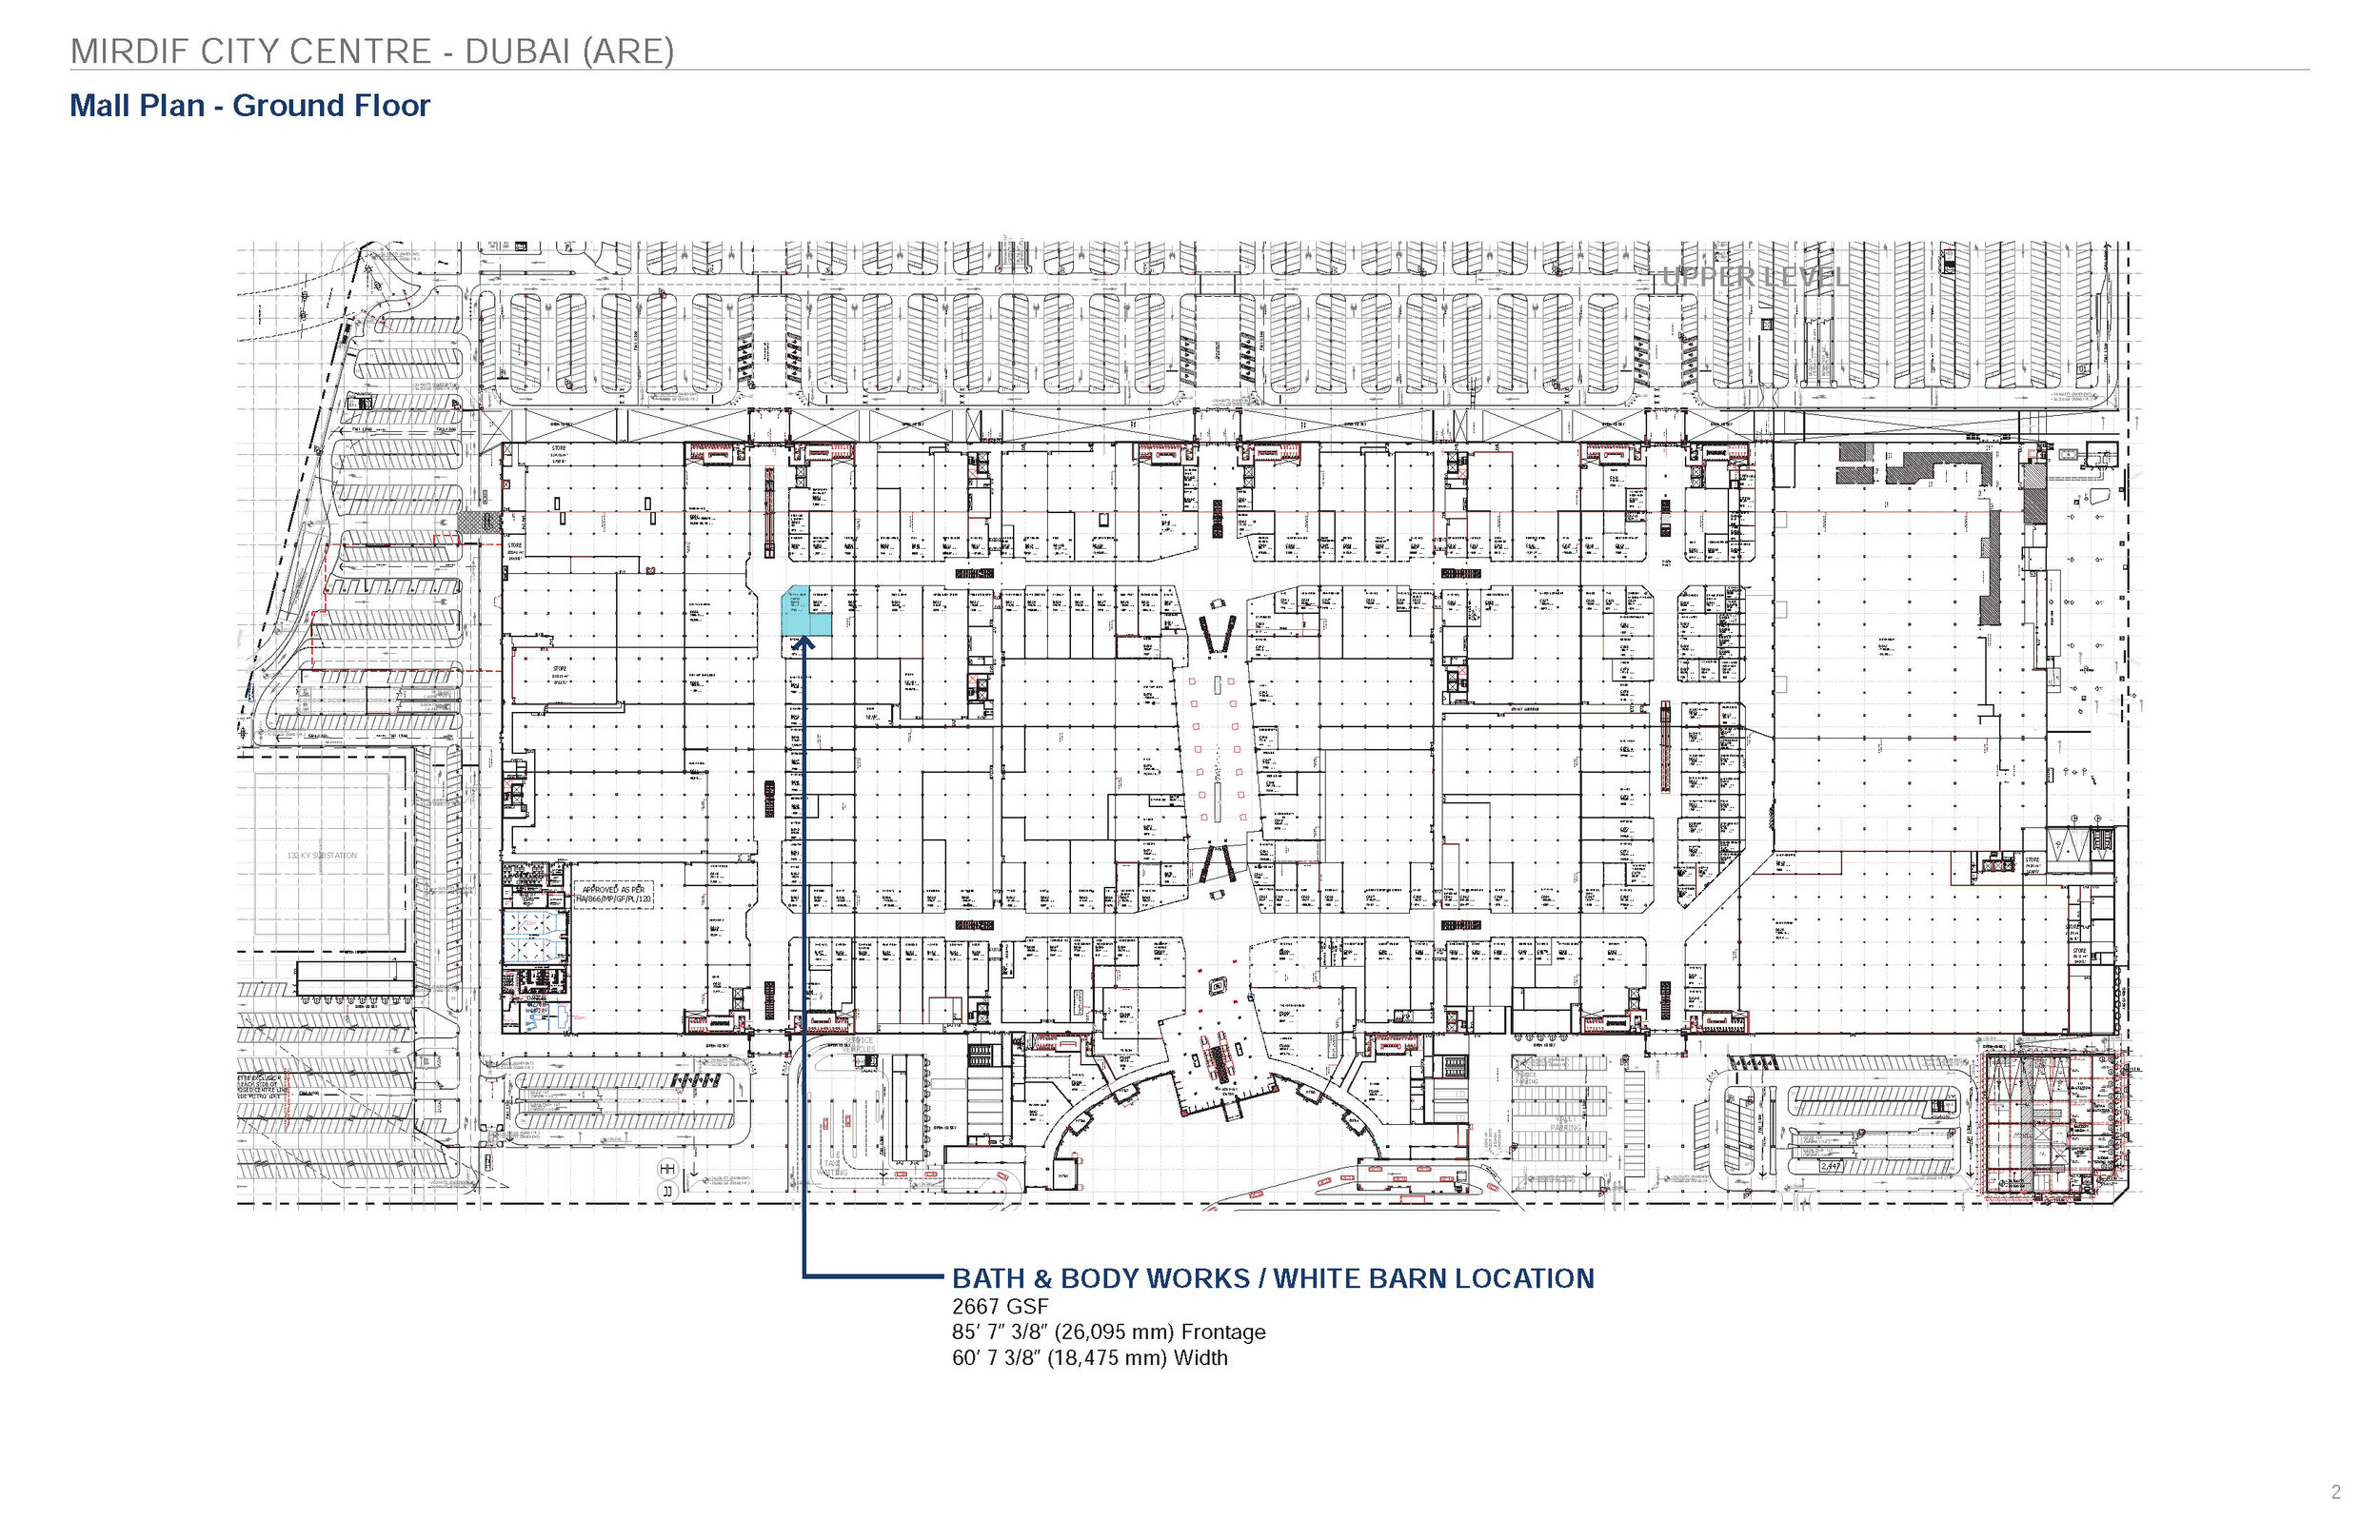 191126 BBW Mirdif City Centre (ARE) Revised Preliminary Schematic Design Package__Page_02.jpg